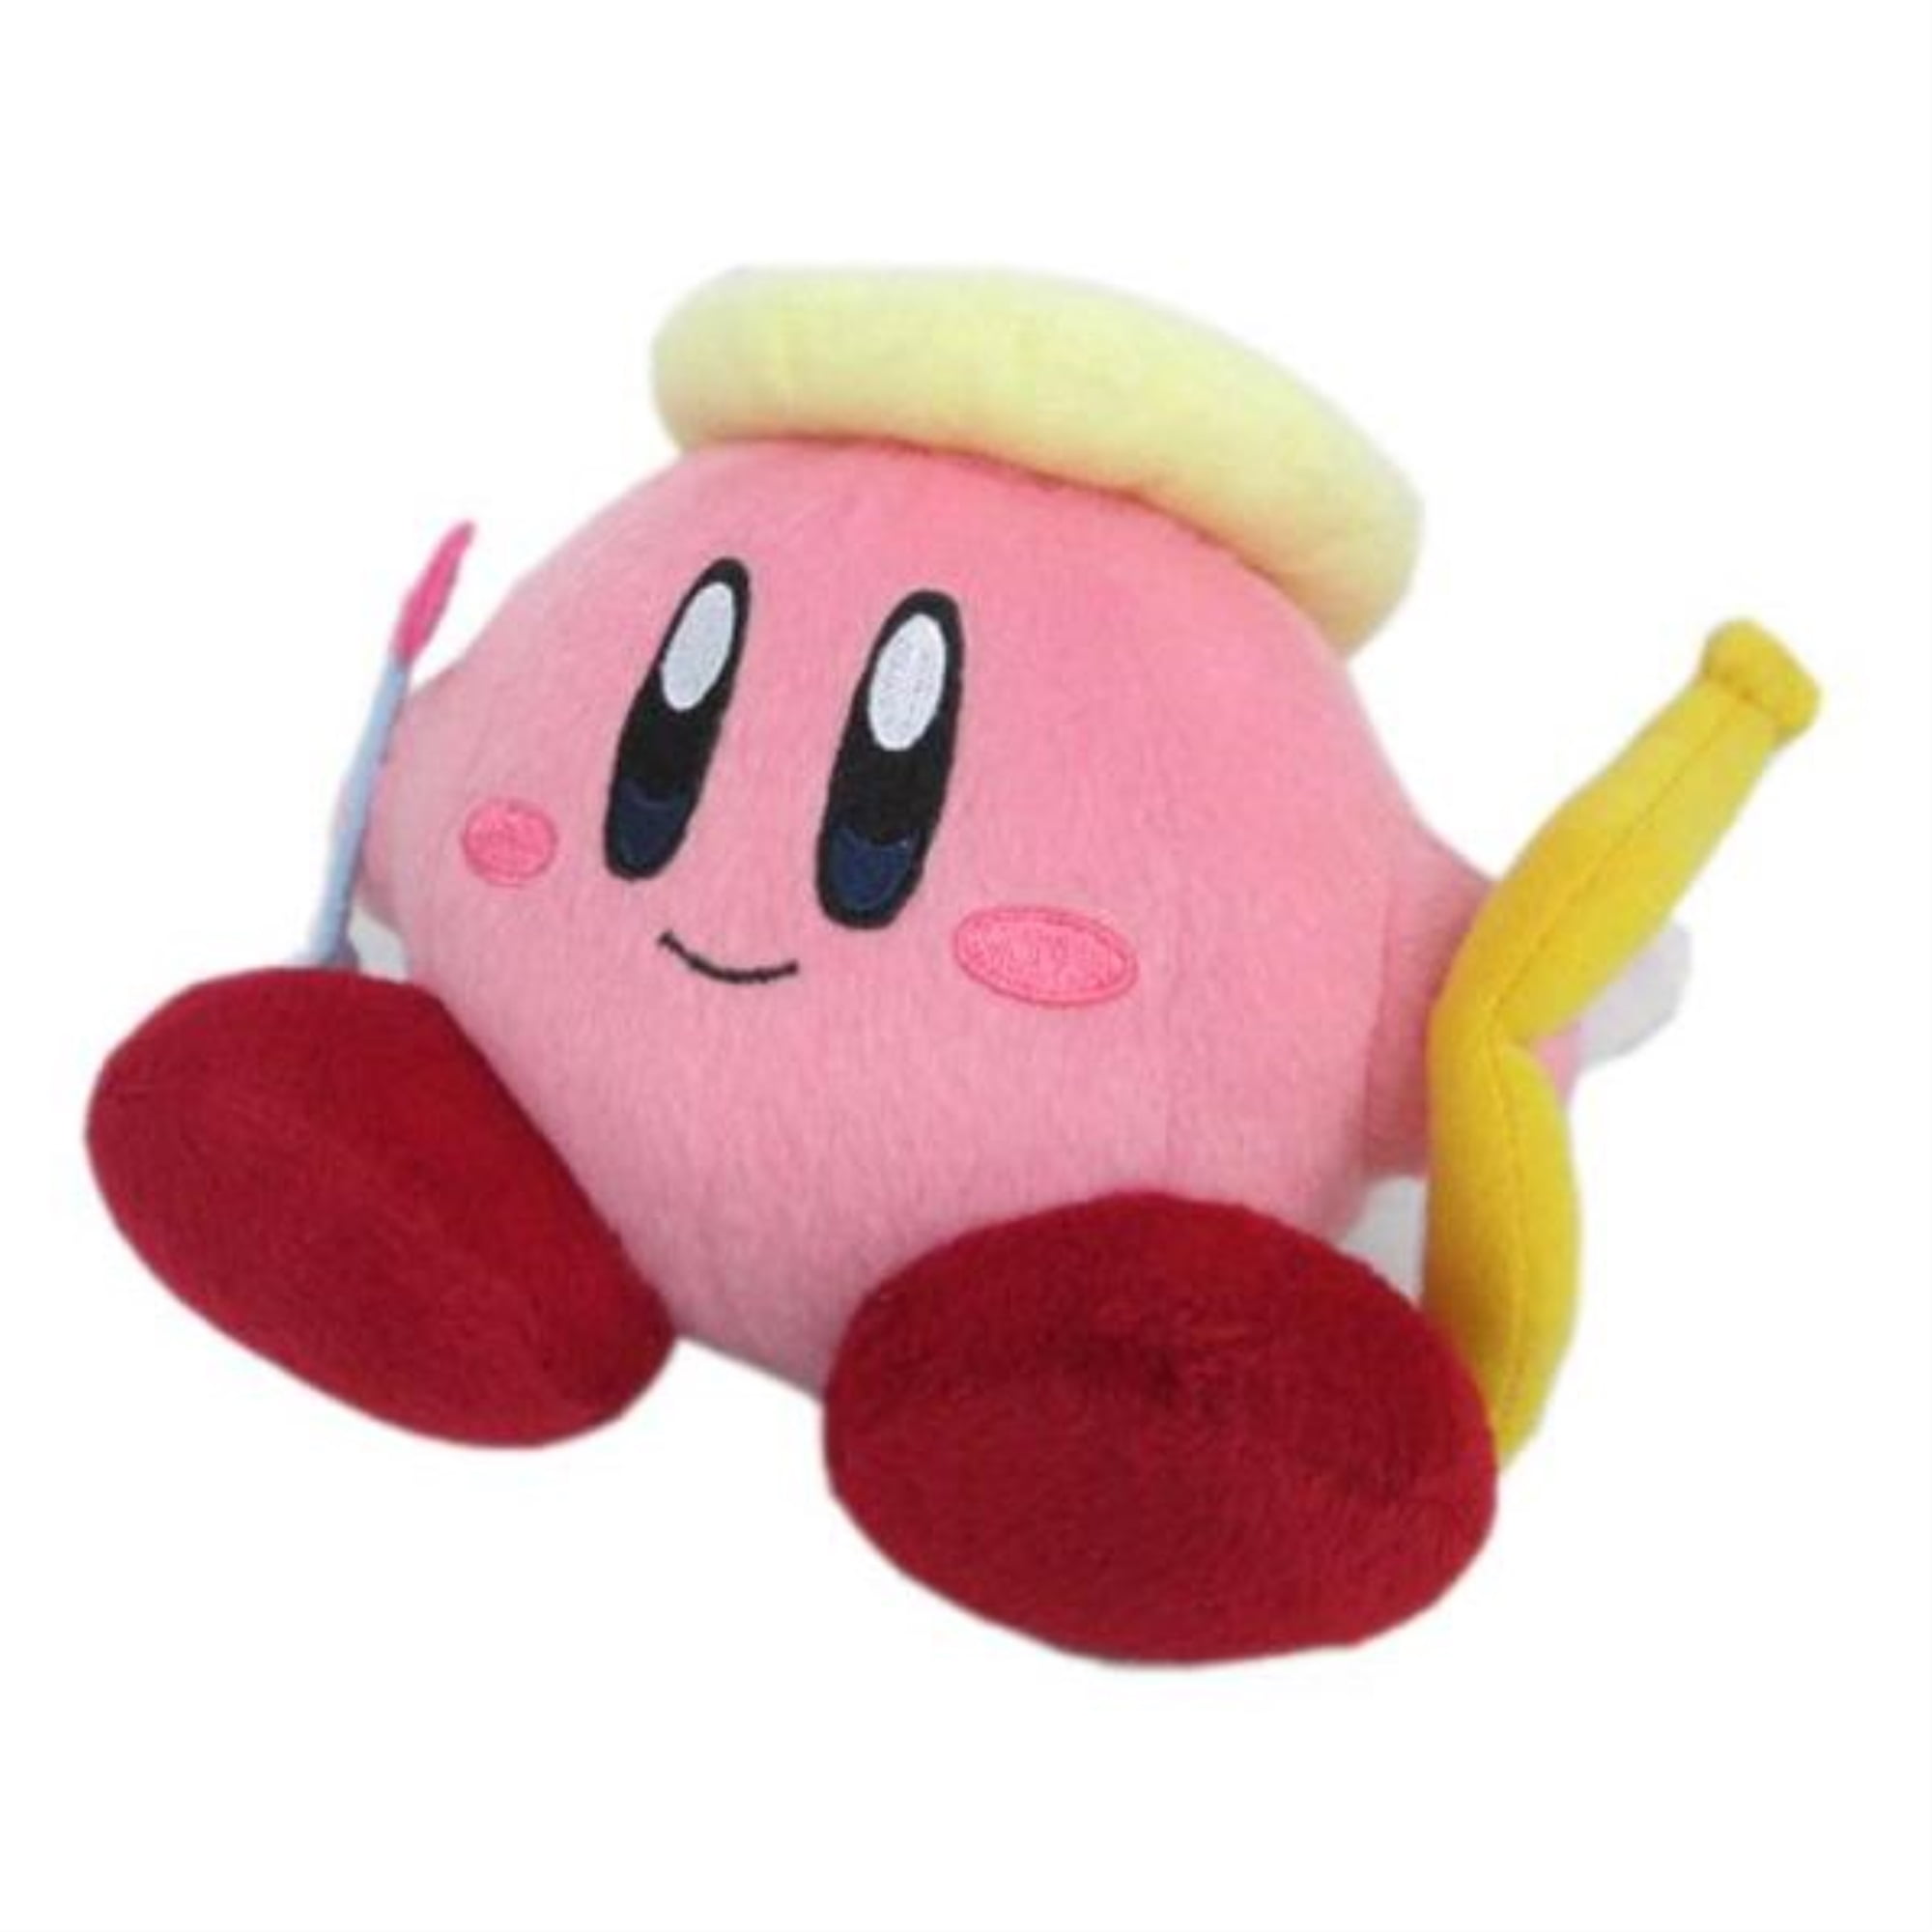 Official 6 Cupid Kirby Plush Doll Stuffed Toy 1318 Little Buddy for sale online 